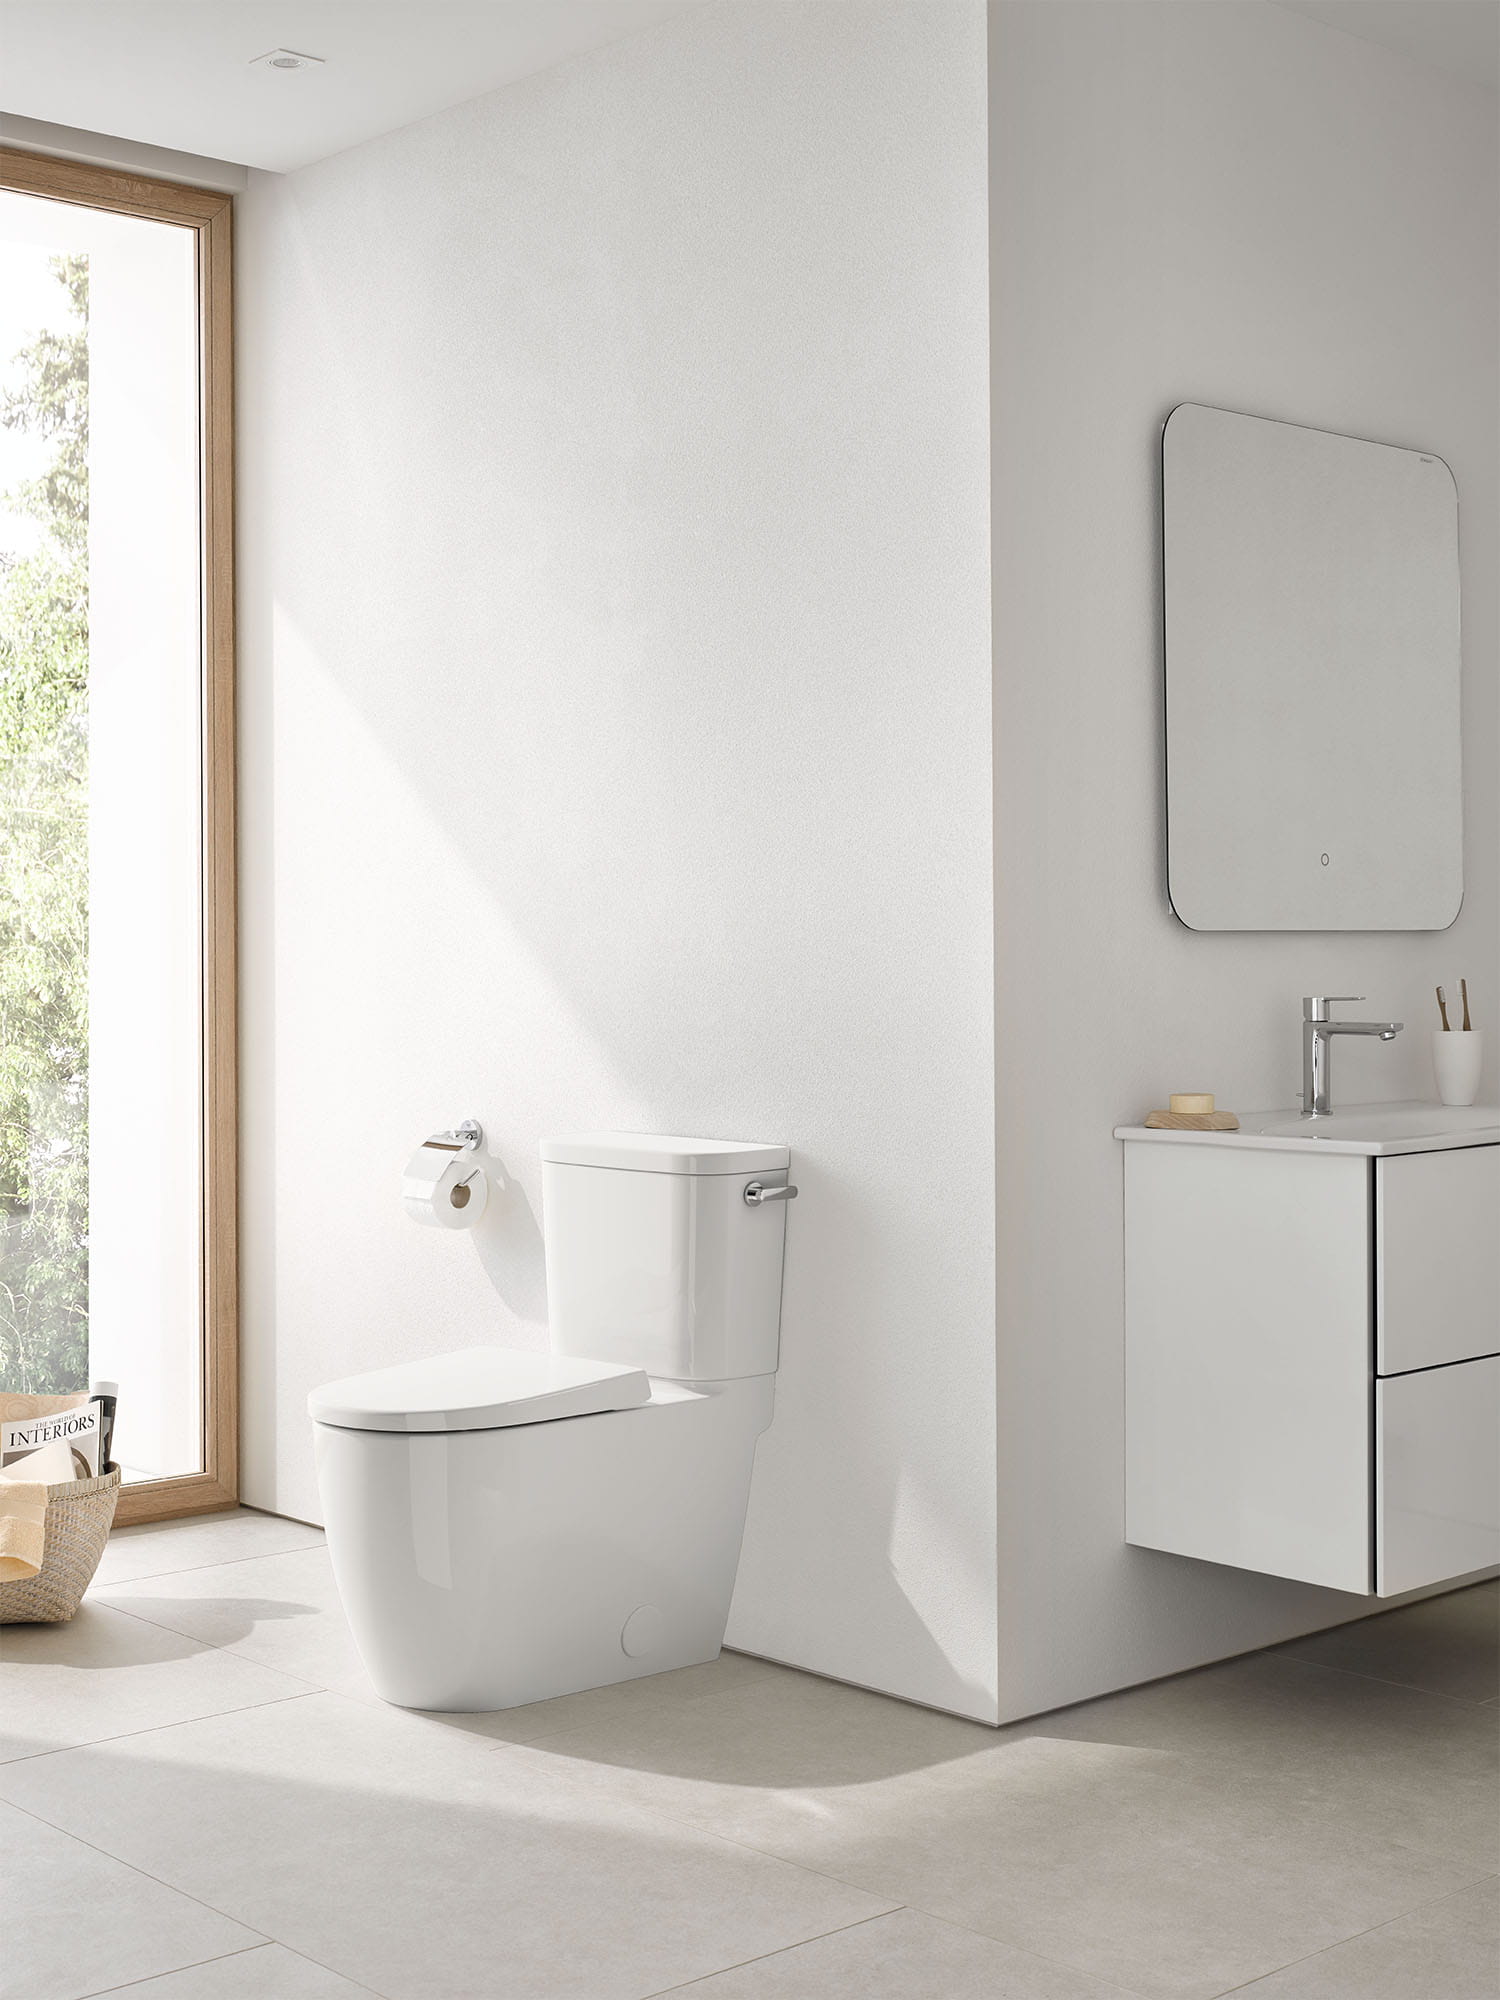 Two-piece Right height Elongated Toilet with seat, Right-Hand Trip Lever